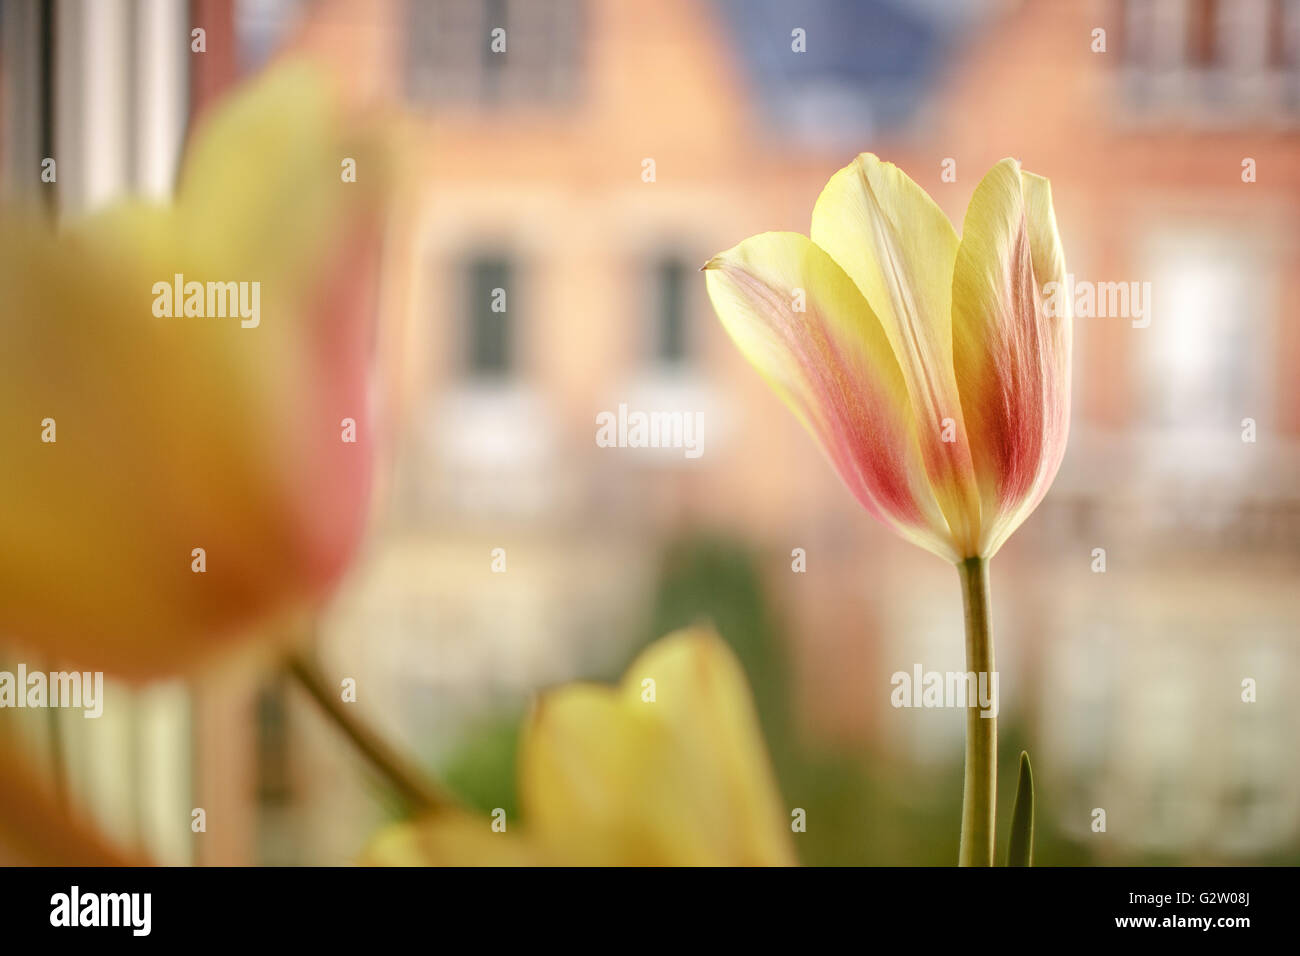 Tulips as window decoration in the living room window with street background Stock Photo